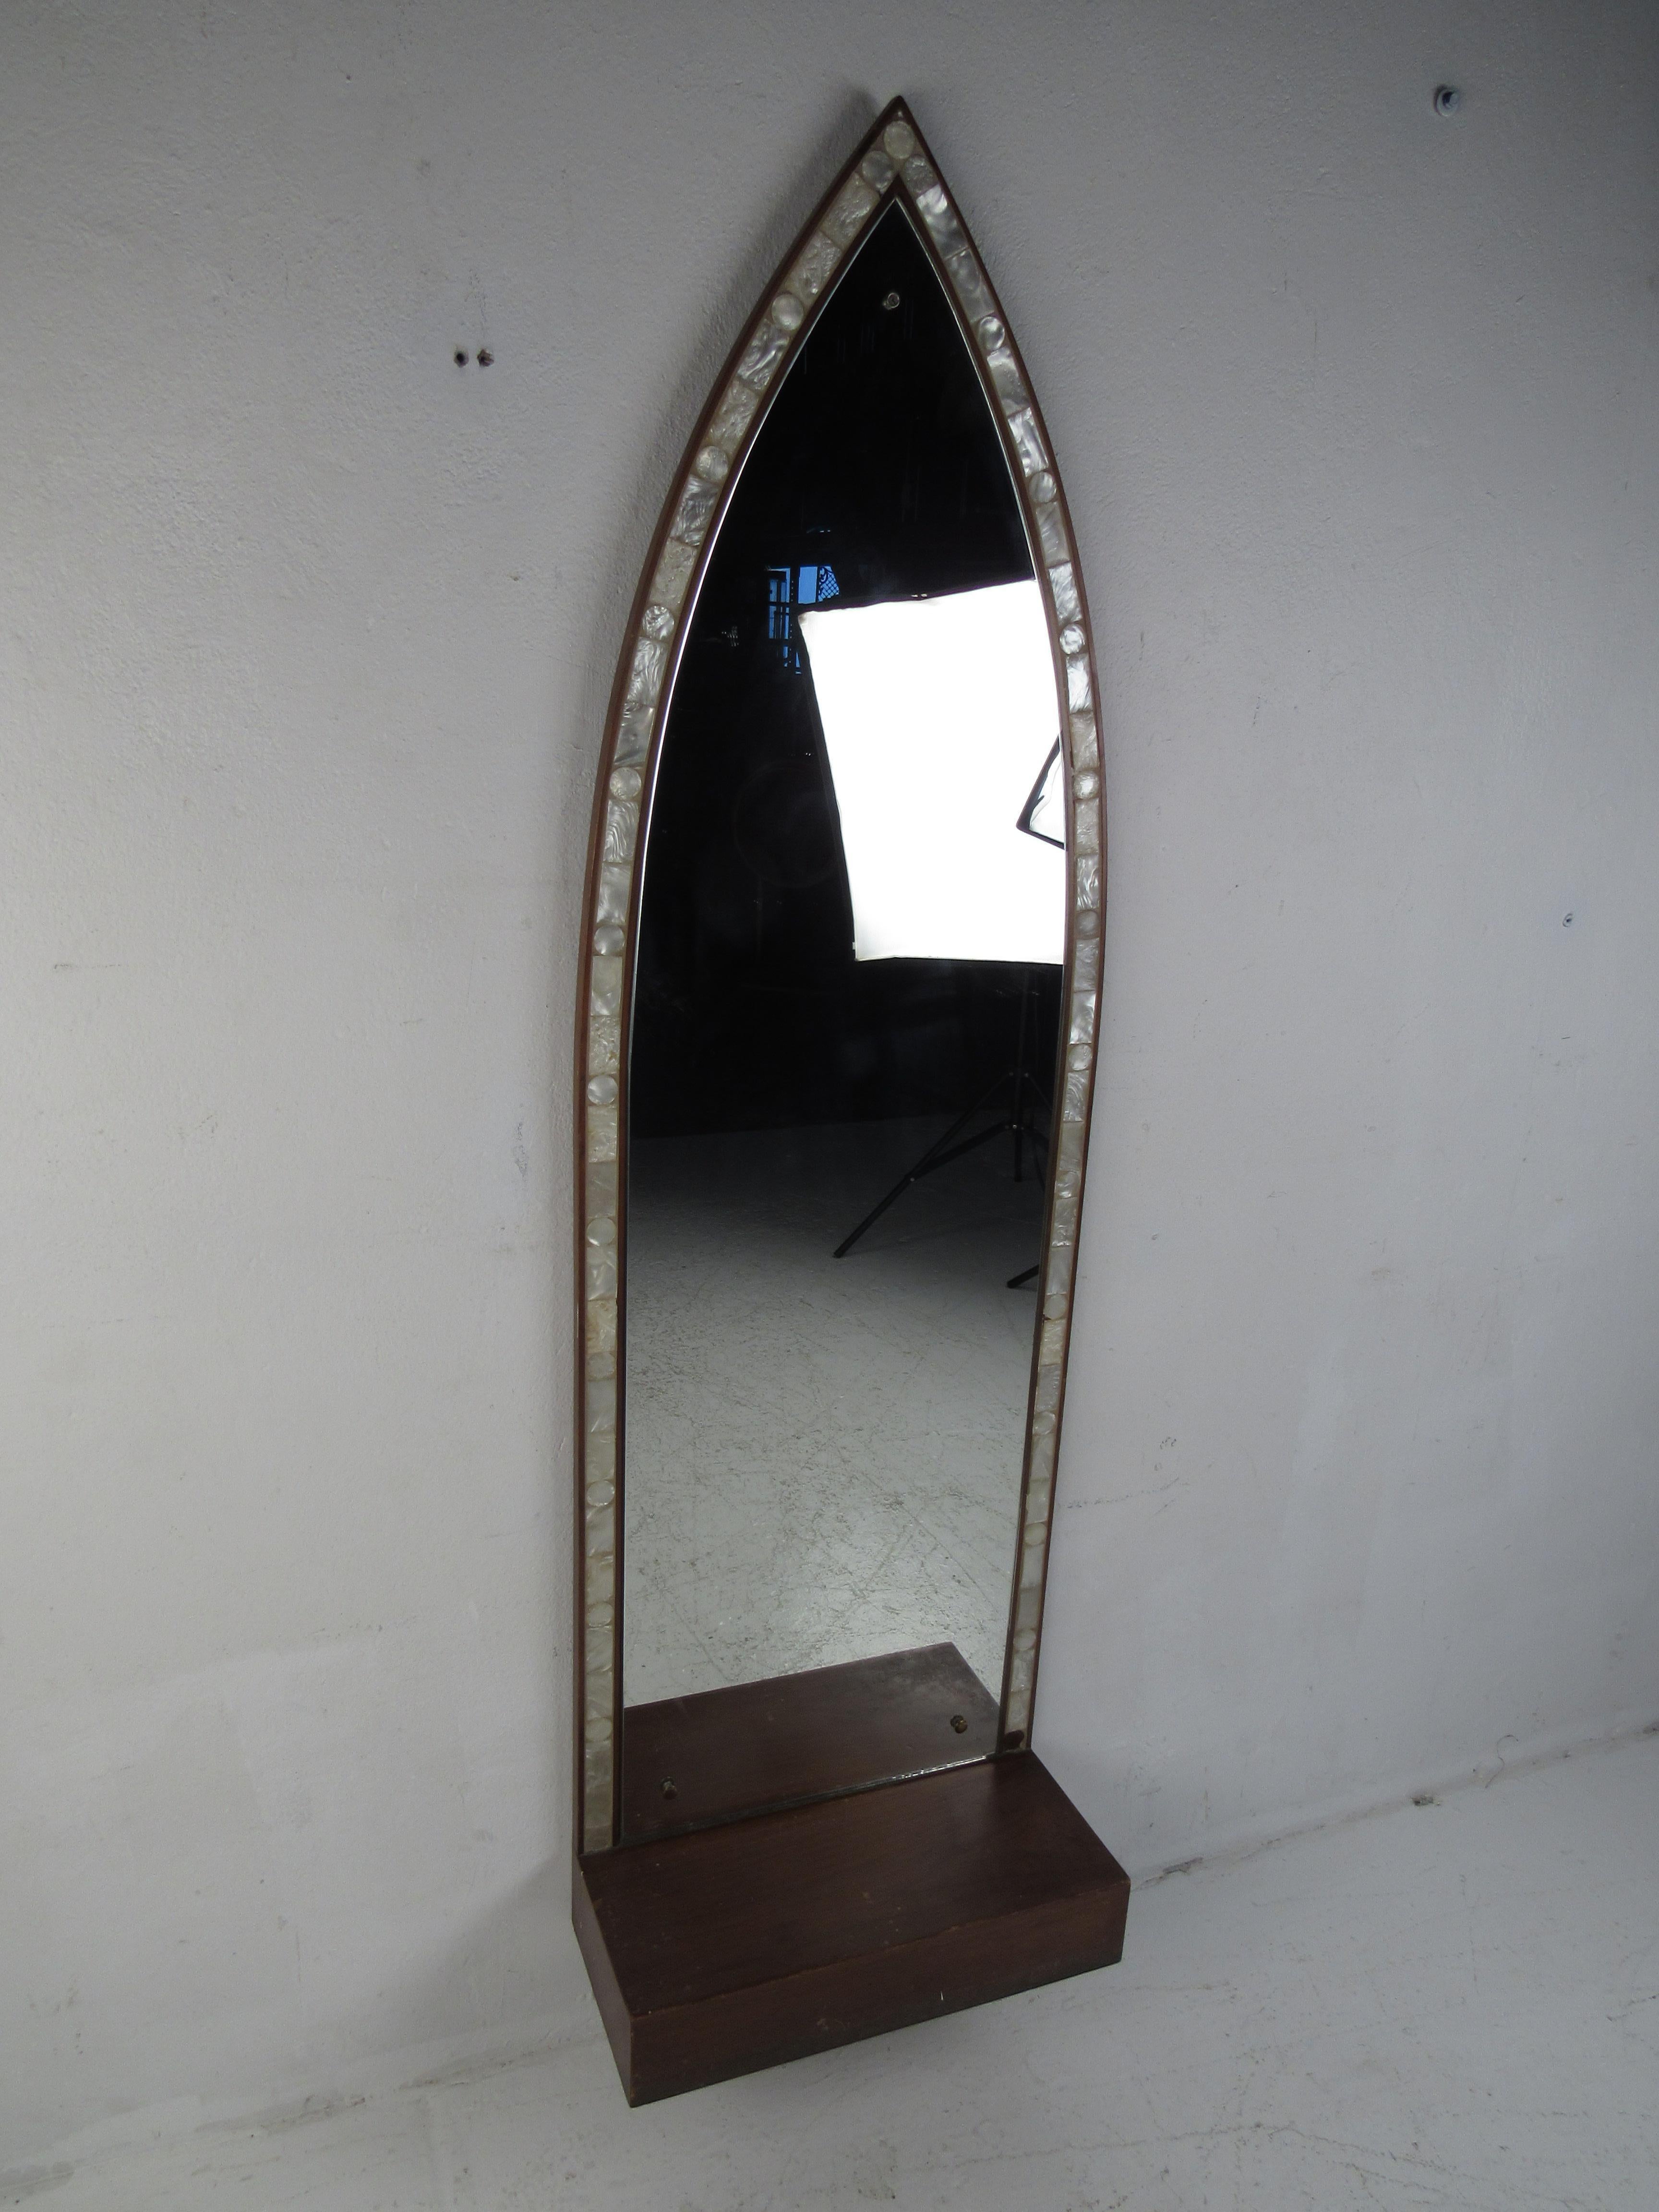 This stunning vintage modern mirror features an unusual textured trim resembling mother of pearl around the edges. The beautiful decorative inlay, unique arched top, and thick walnut shelf adds to the mid-century appeal. A wonderful design that